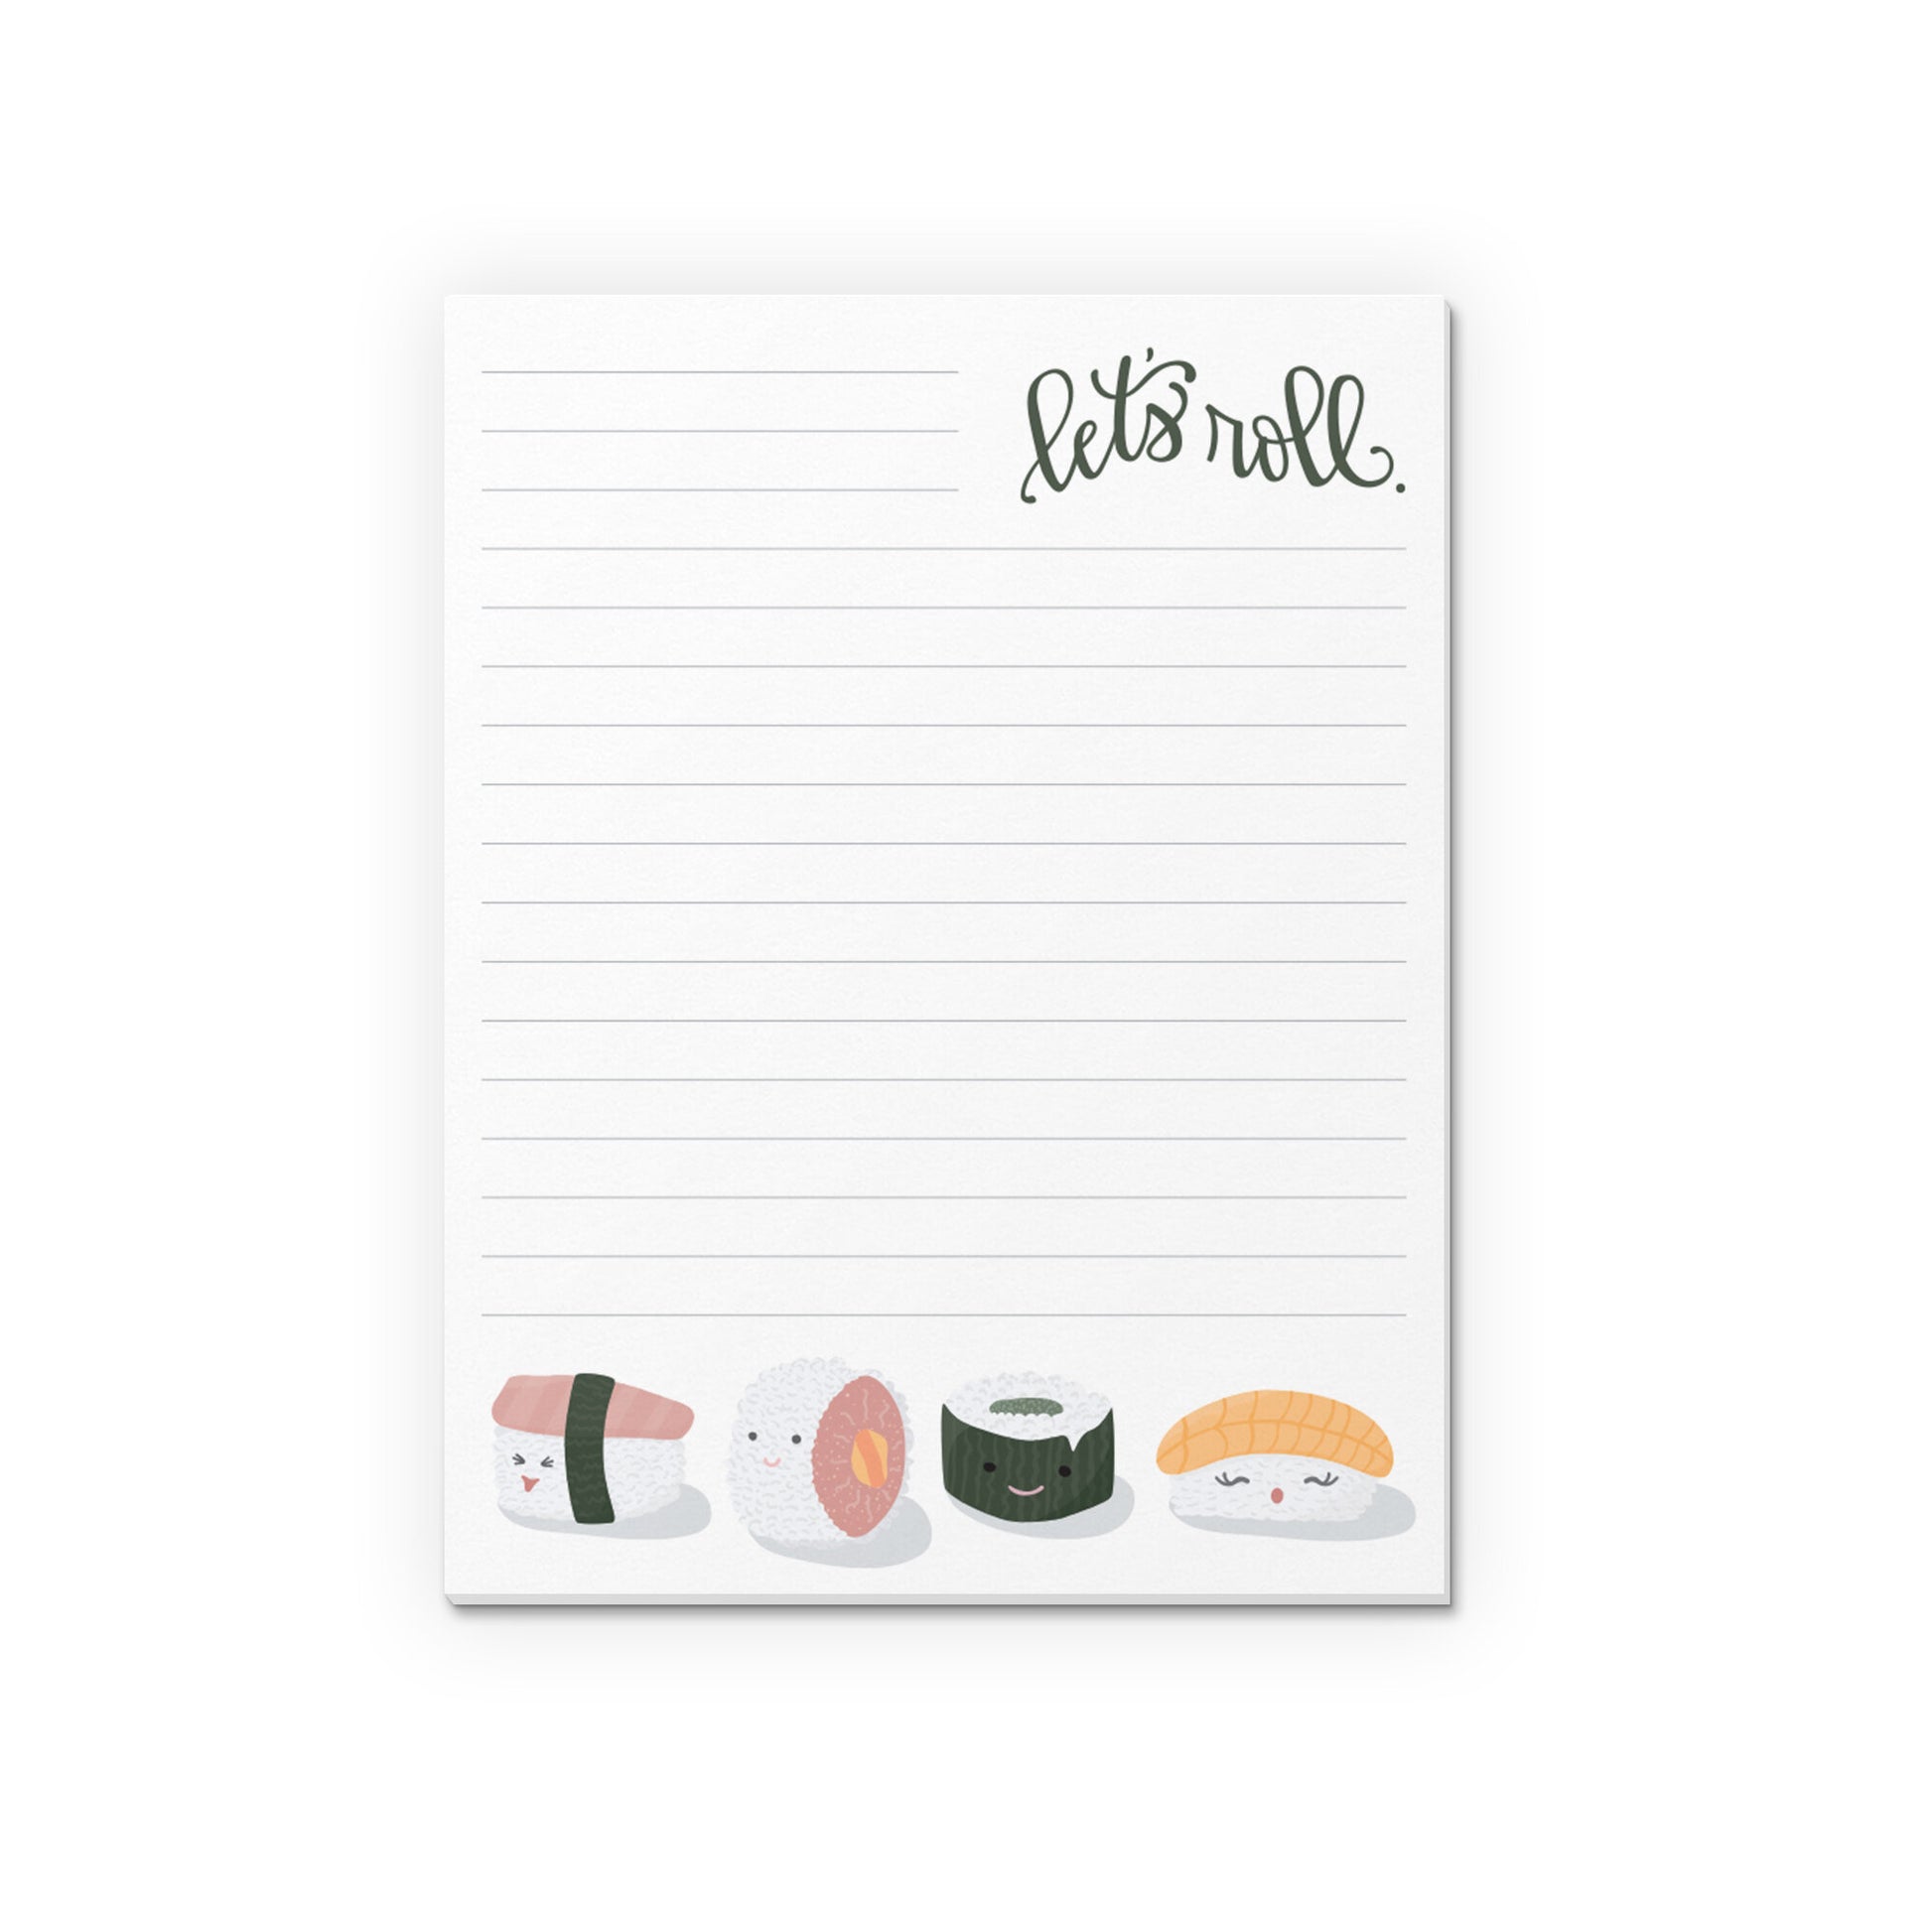 Sushi themed mini notepad with cute illustrations of sushi rolls and the text, let's roll